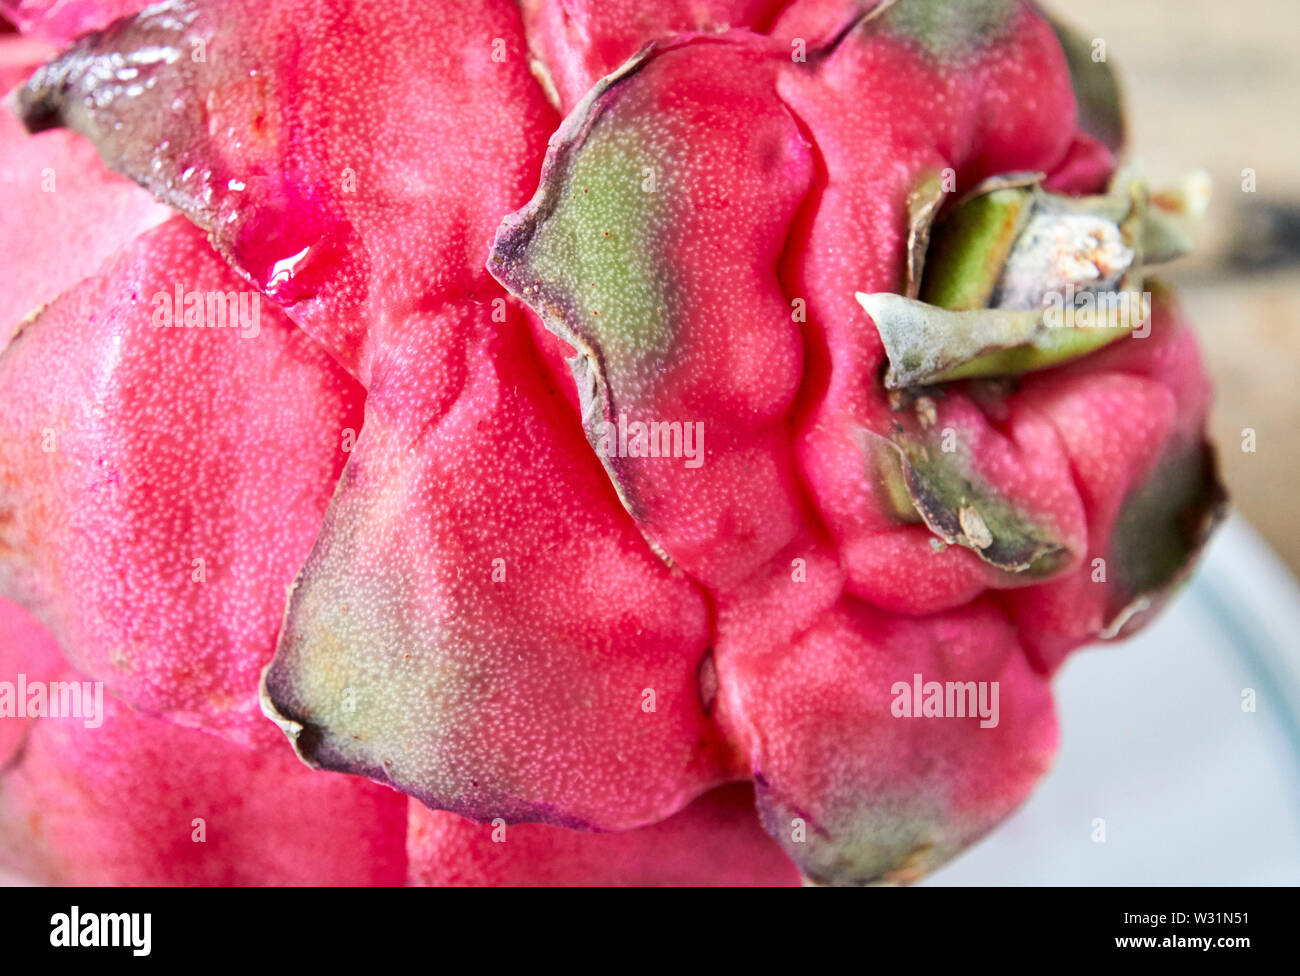 scaly skin of dragonfruit red fruit scales Stock Photo